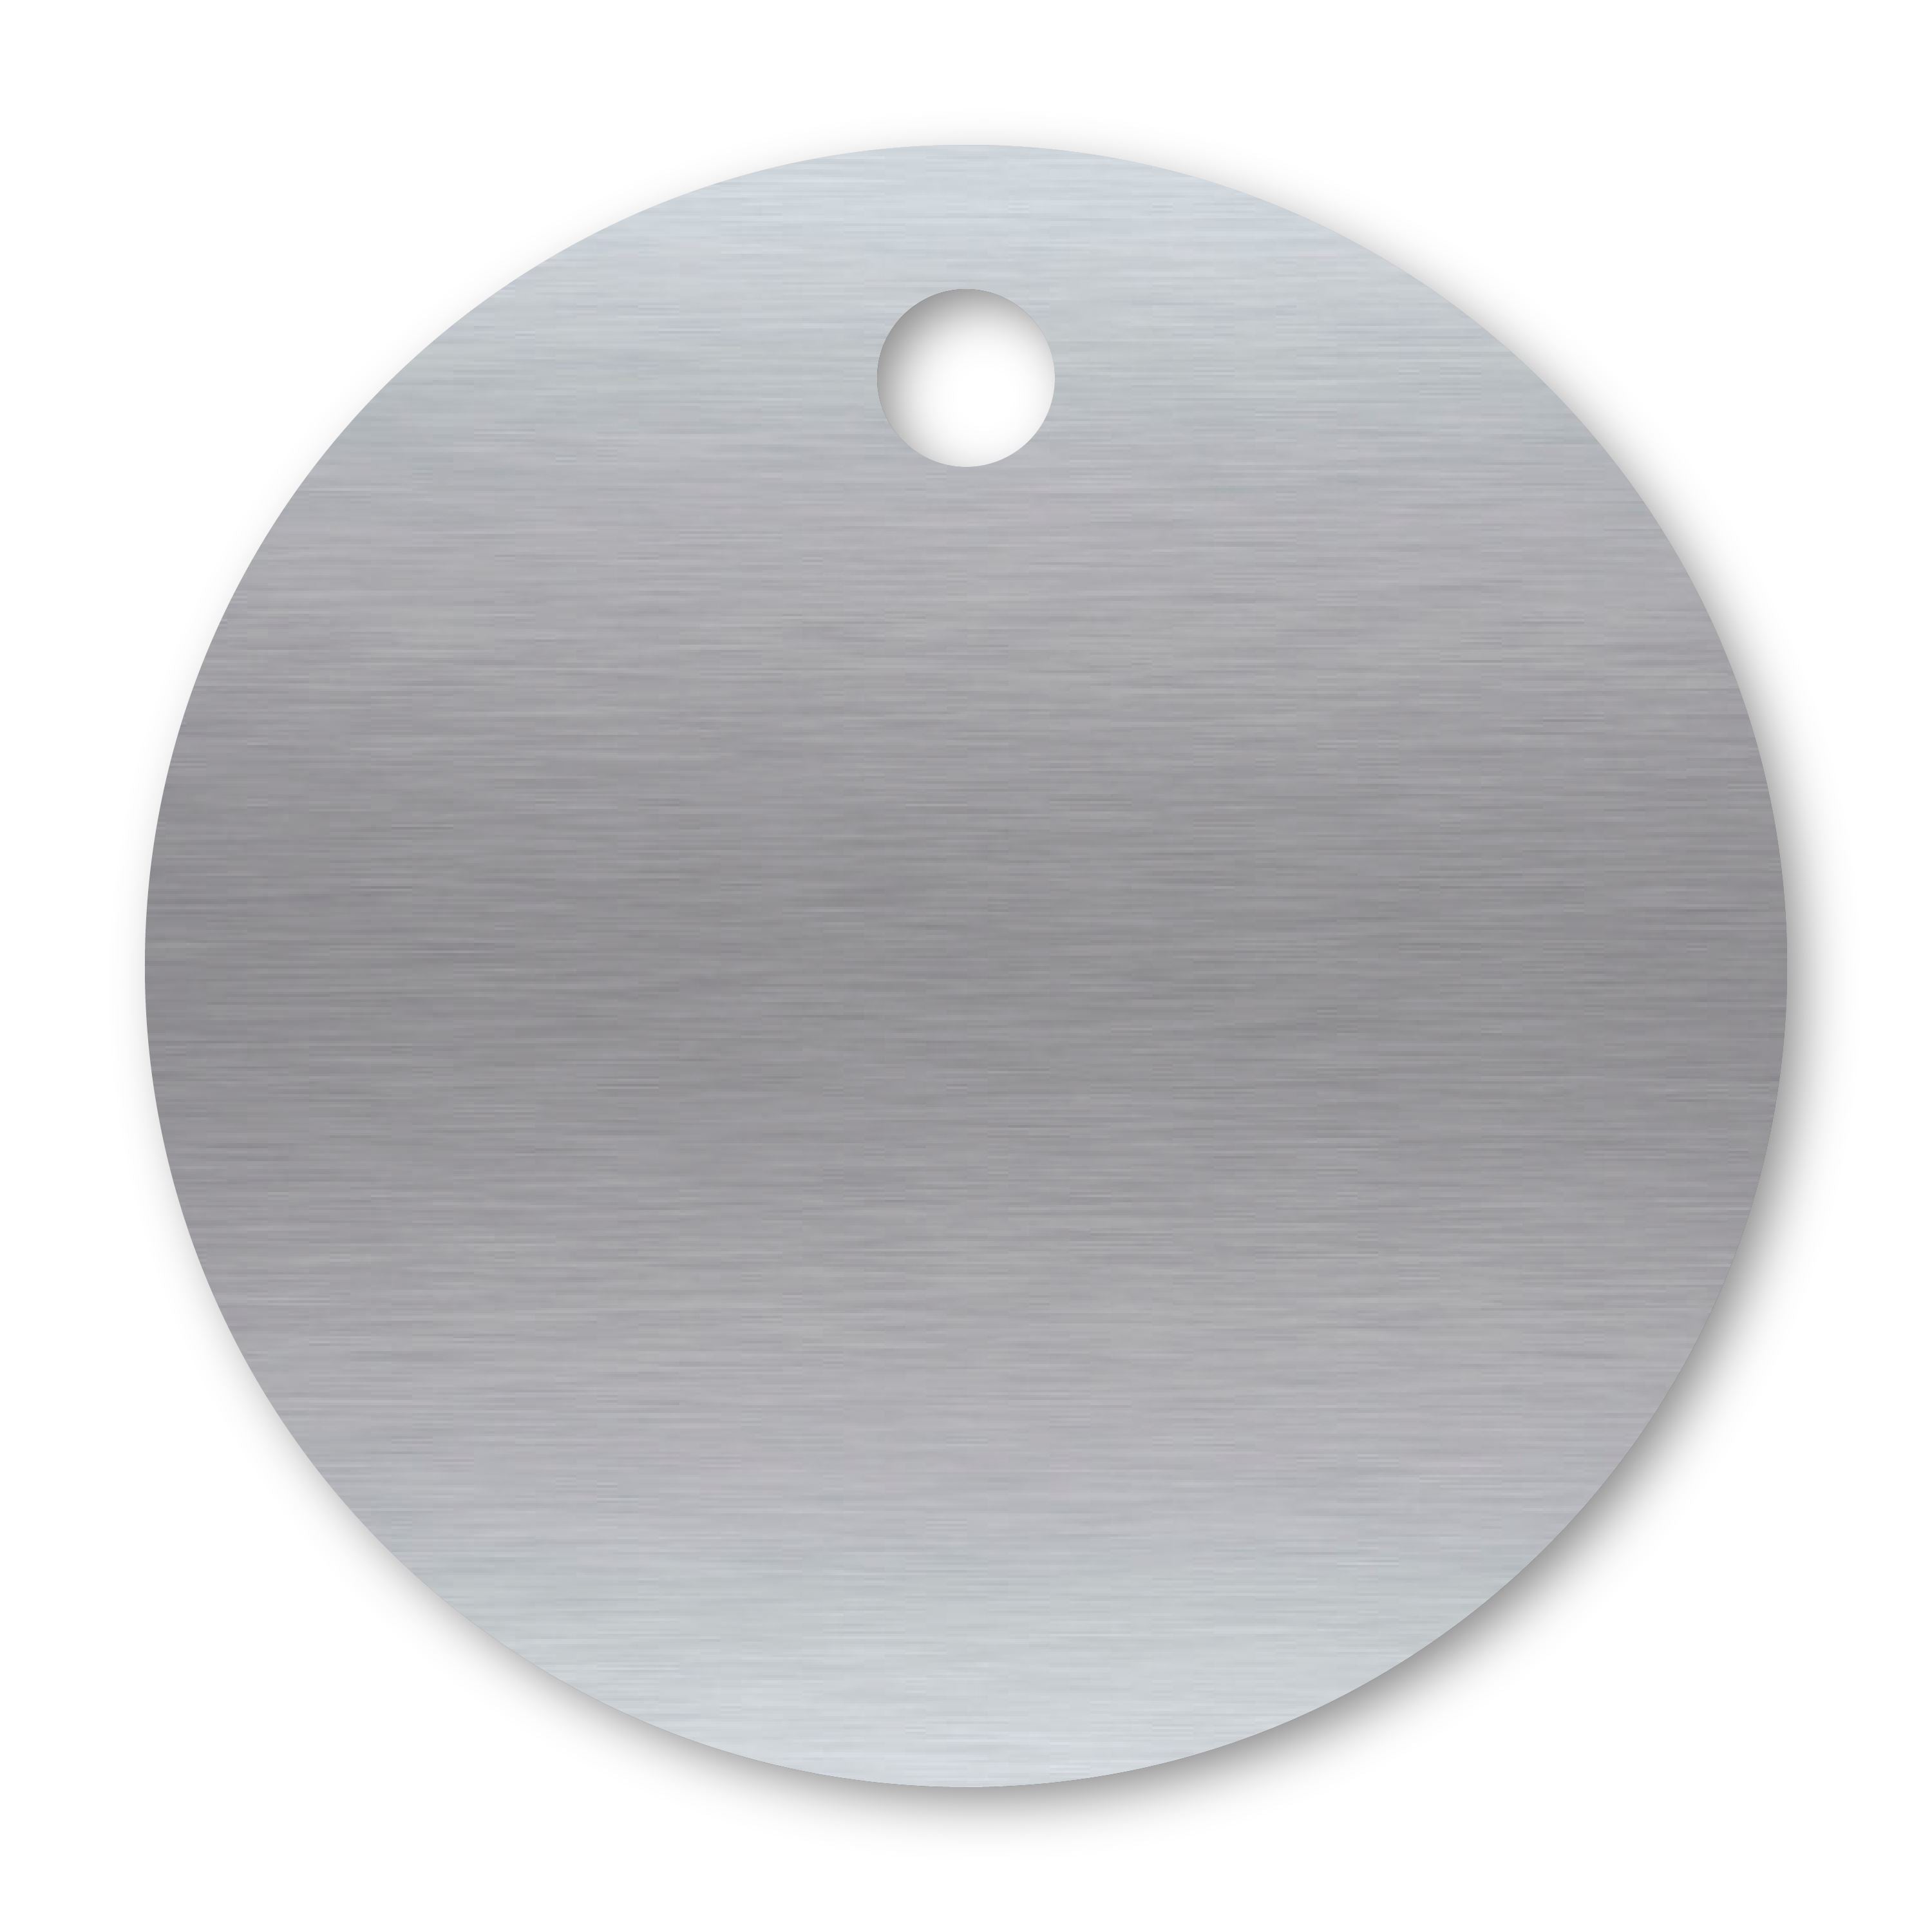 Anodized Aluminum Round Tags, 1-1/2" with 1/8" Hole, Laser Engraved Metal Tags Craftworks NW Silver 